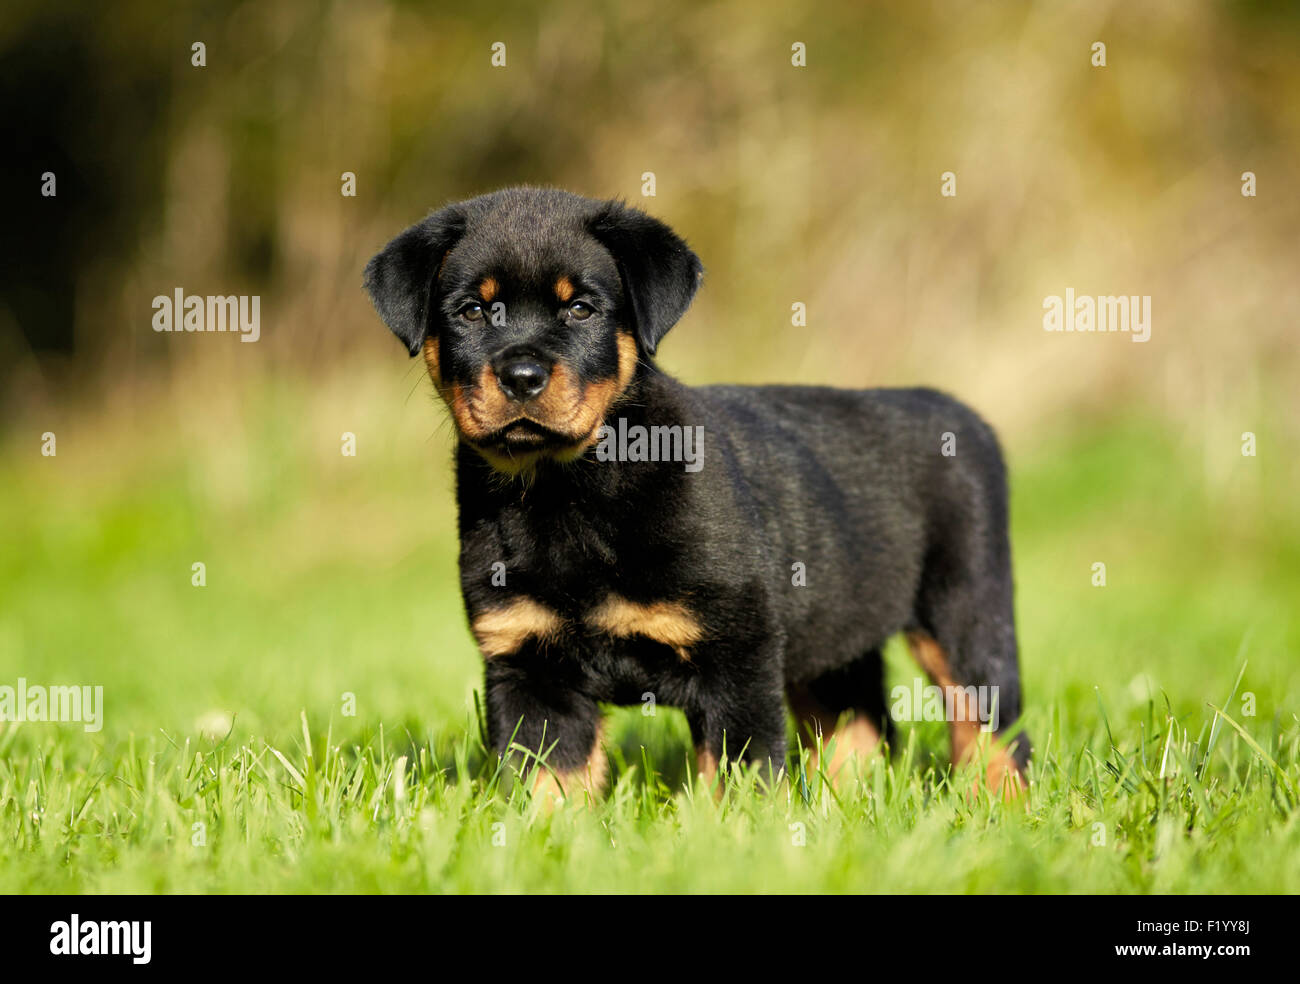 Rottweiler. Puppy standing on a lawn Germany Stock Photo